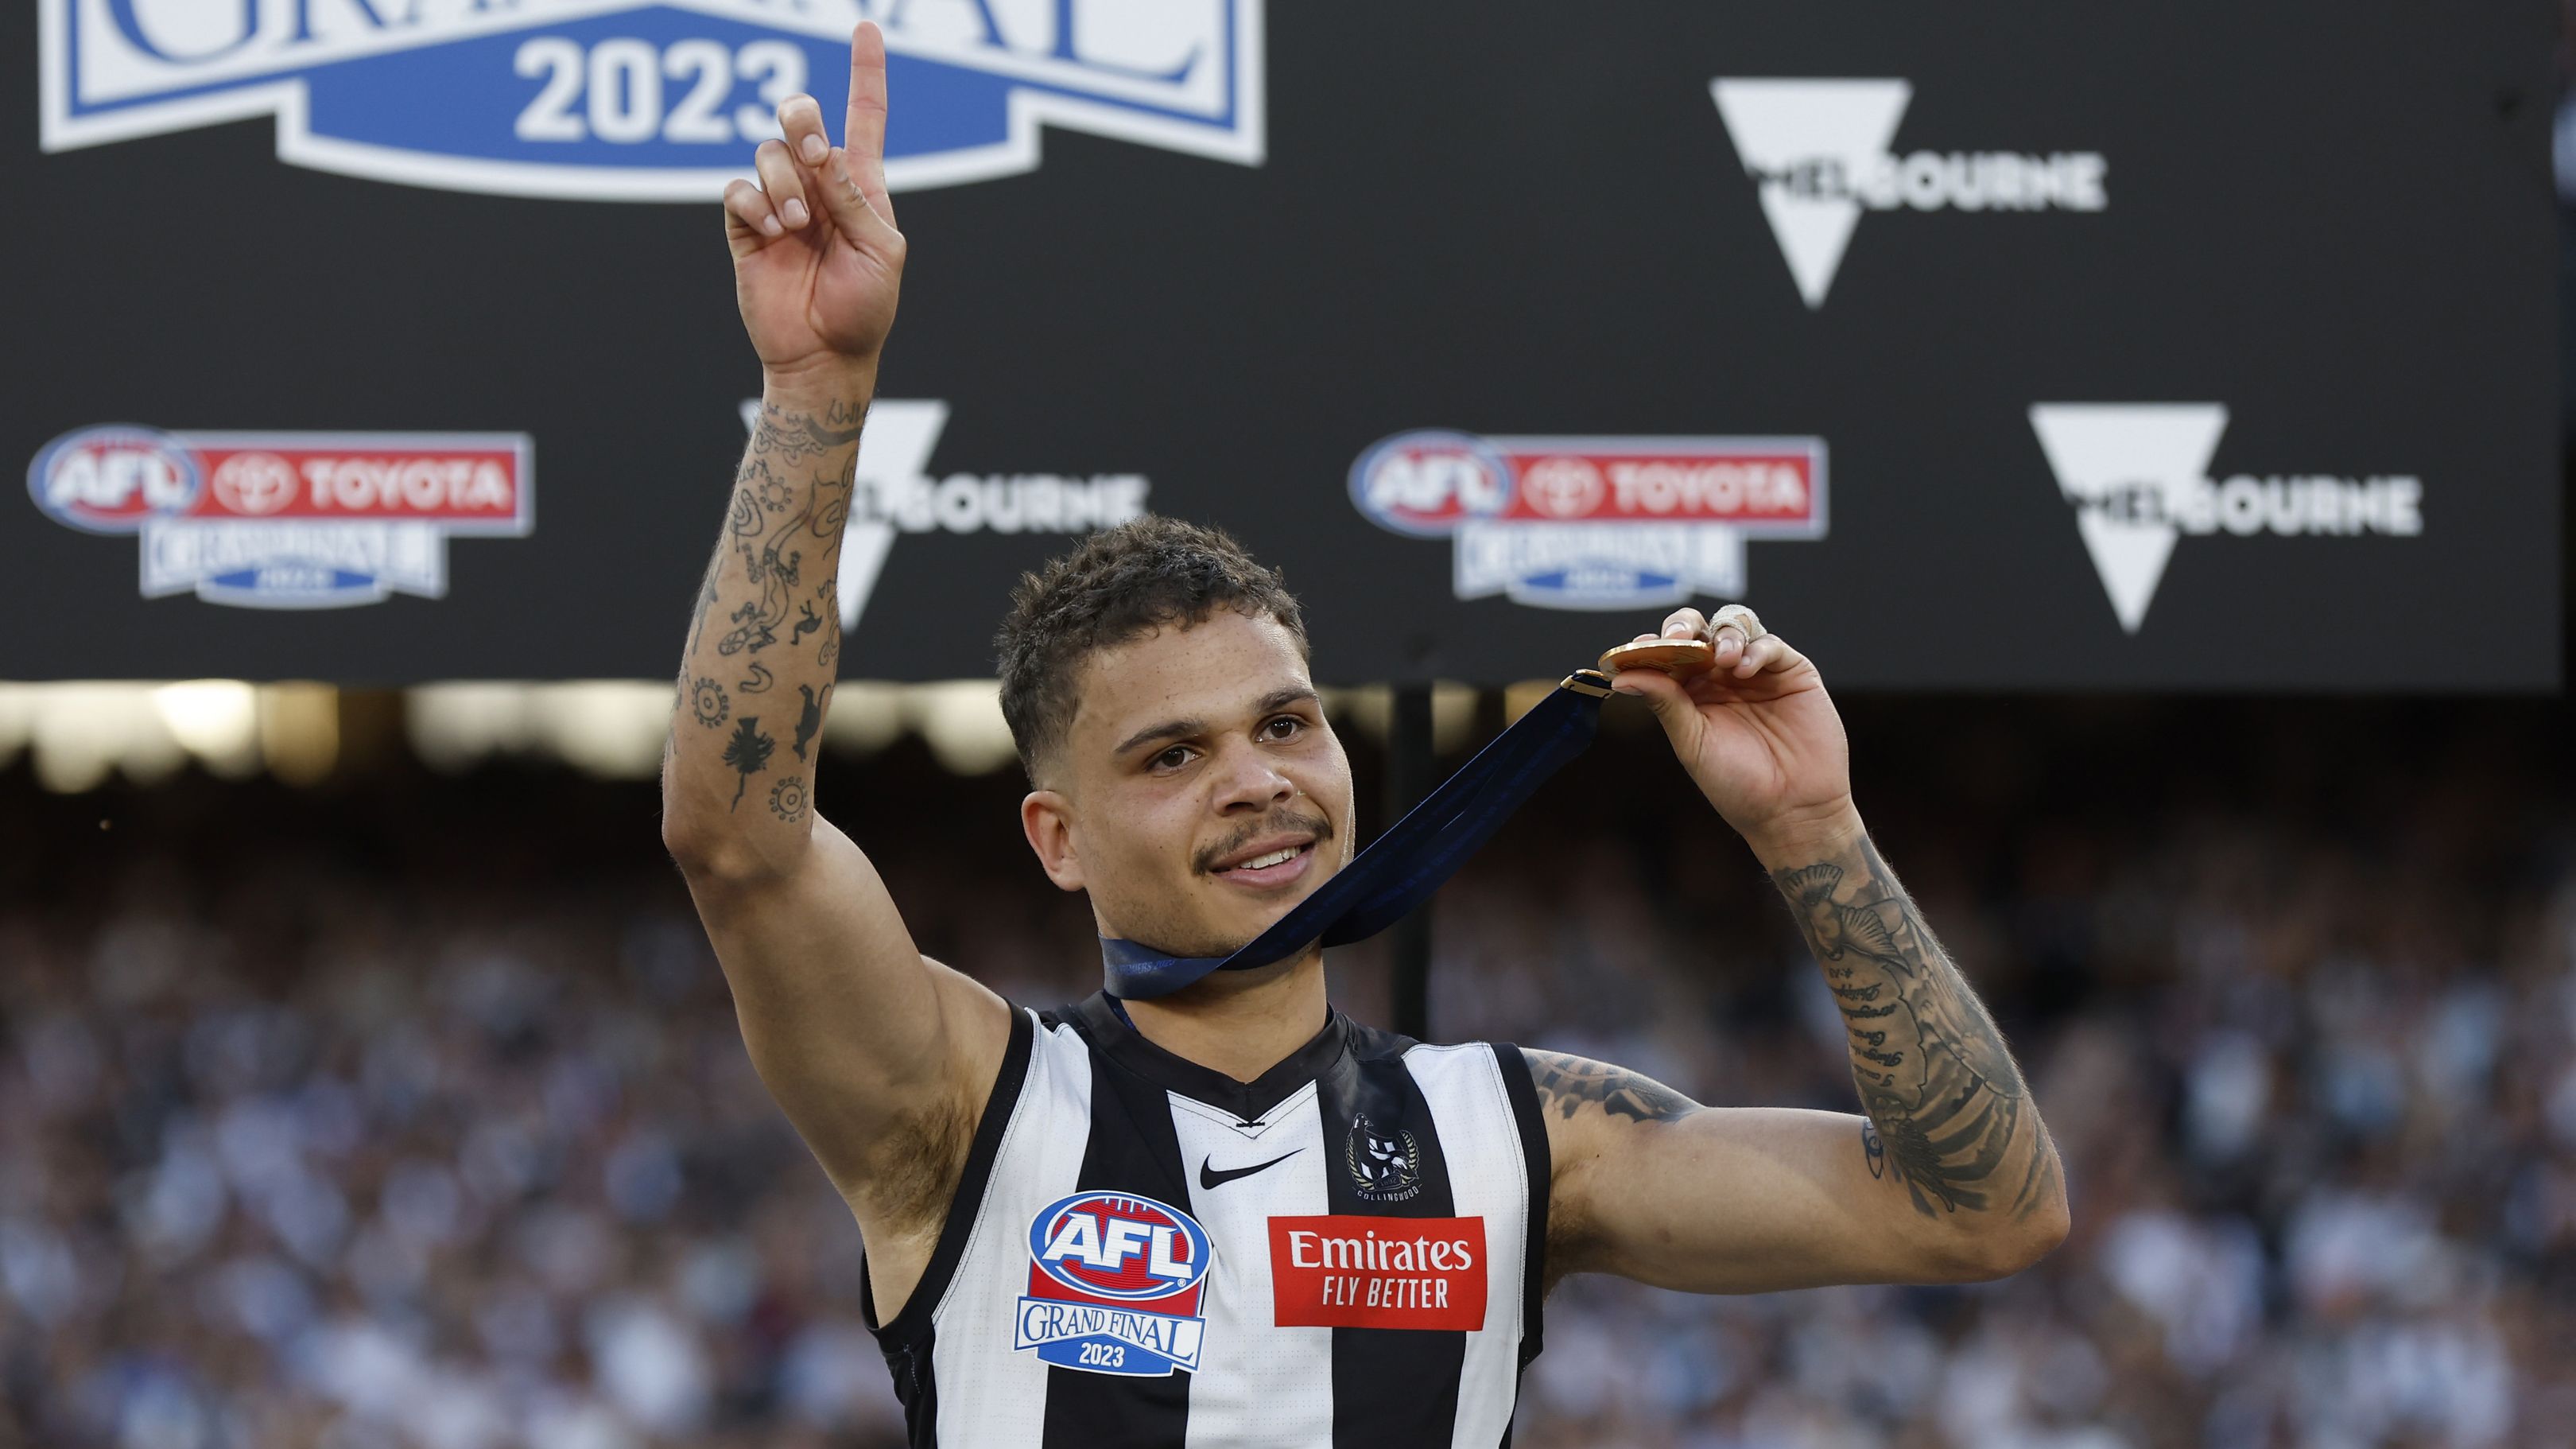 MELBOURNE, AUSTRALIA - SEPTEMBER 30: Bobby Hill of the Magpies celebrates after the 2023 AFL Grand Final match between Collingwood Magpies and Brisbane Lions at Melbourne Cricket Ground, on September 30, 2023, in Melbourne, Australia. (Photo by Darrian Traynor/AFL Photos/via Getty Images)